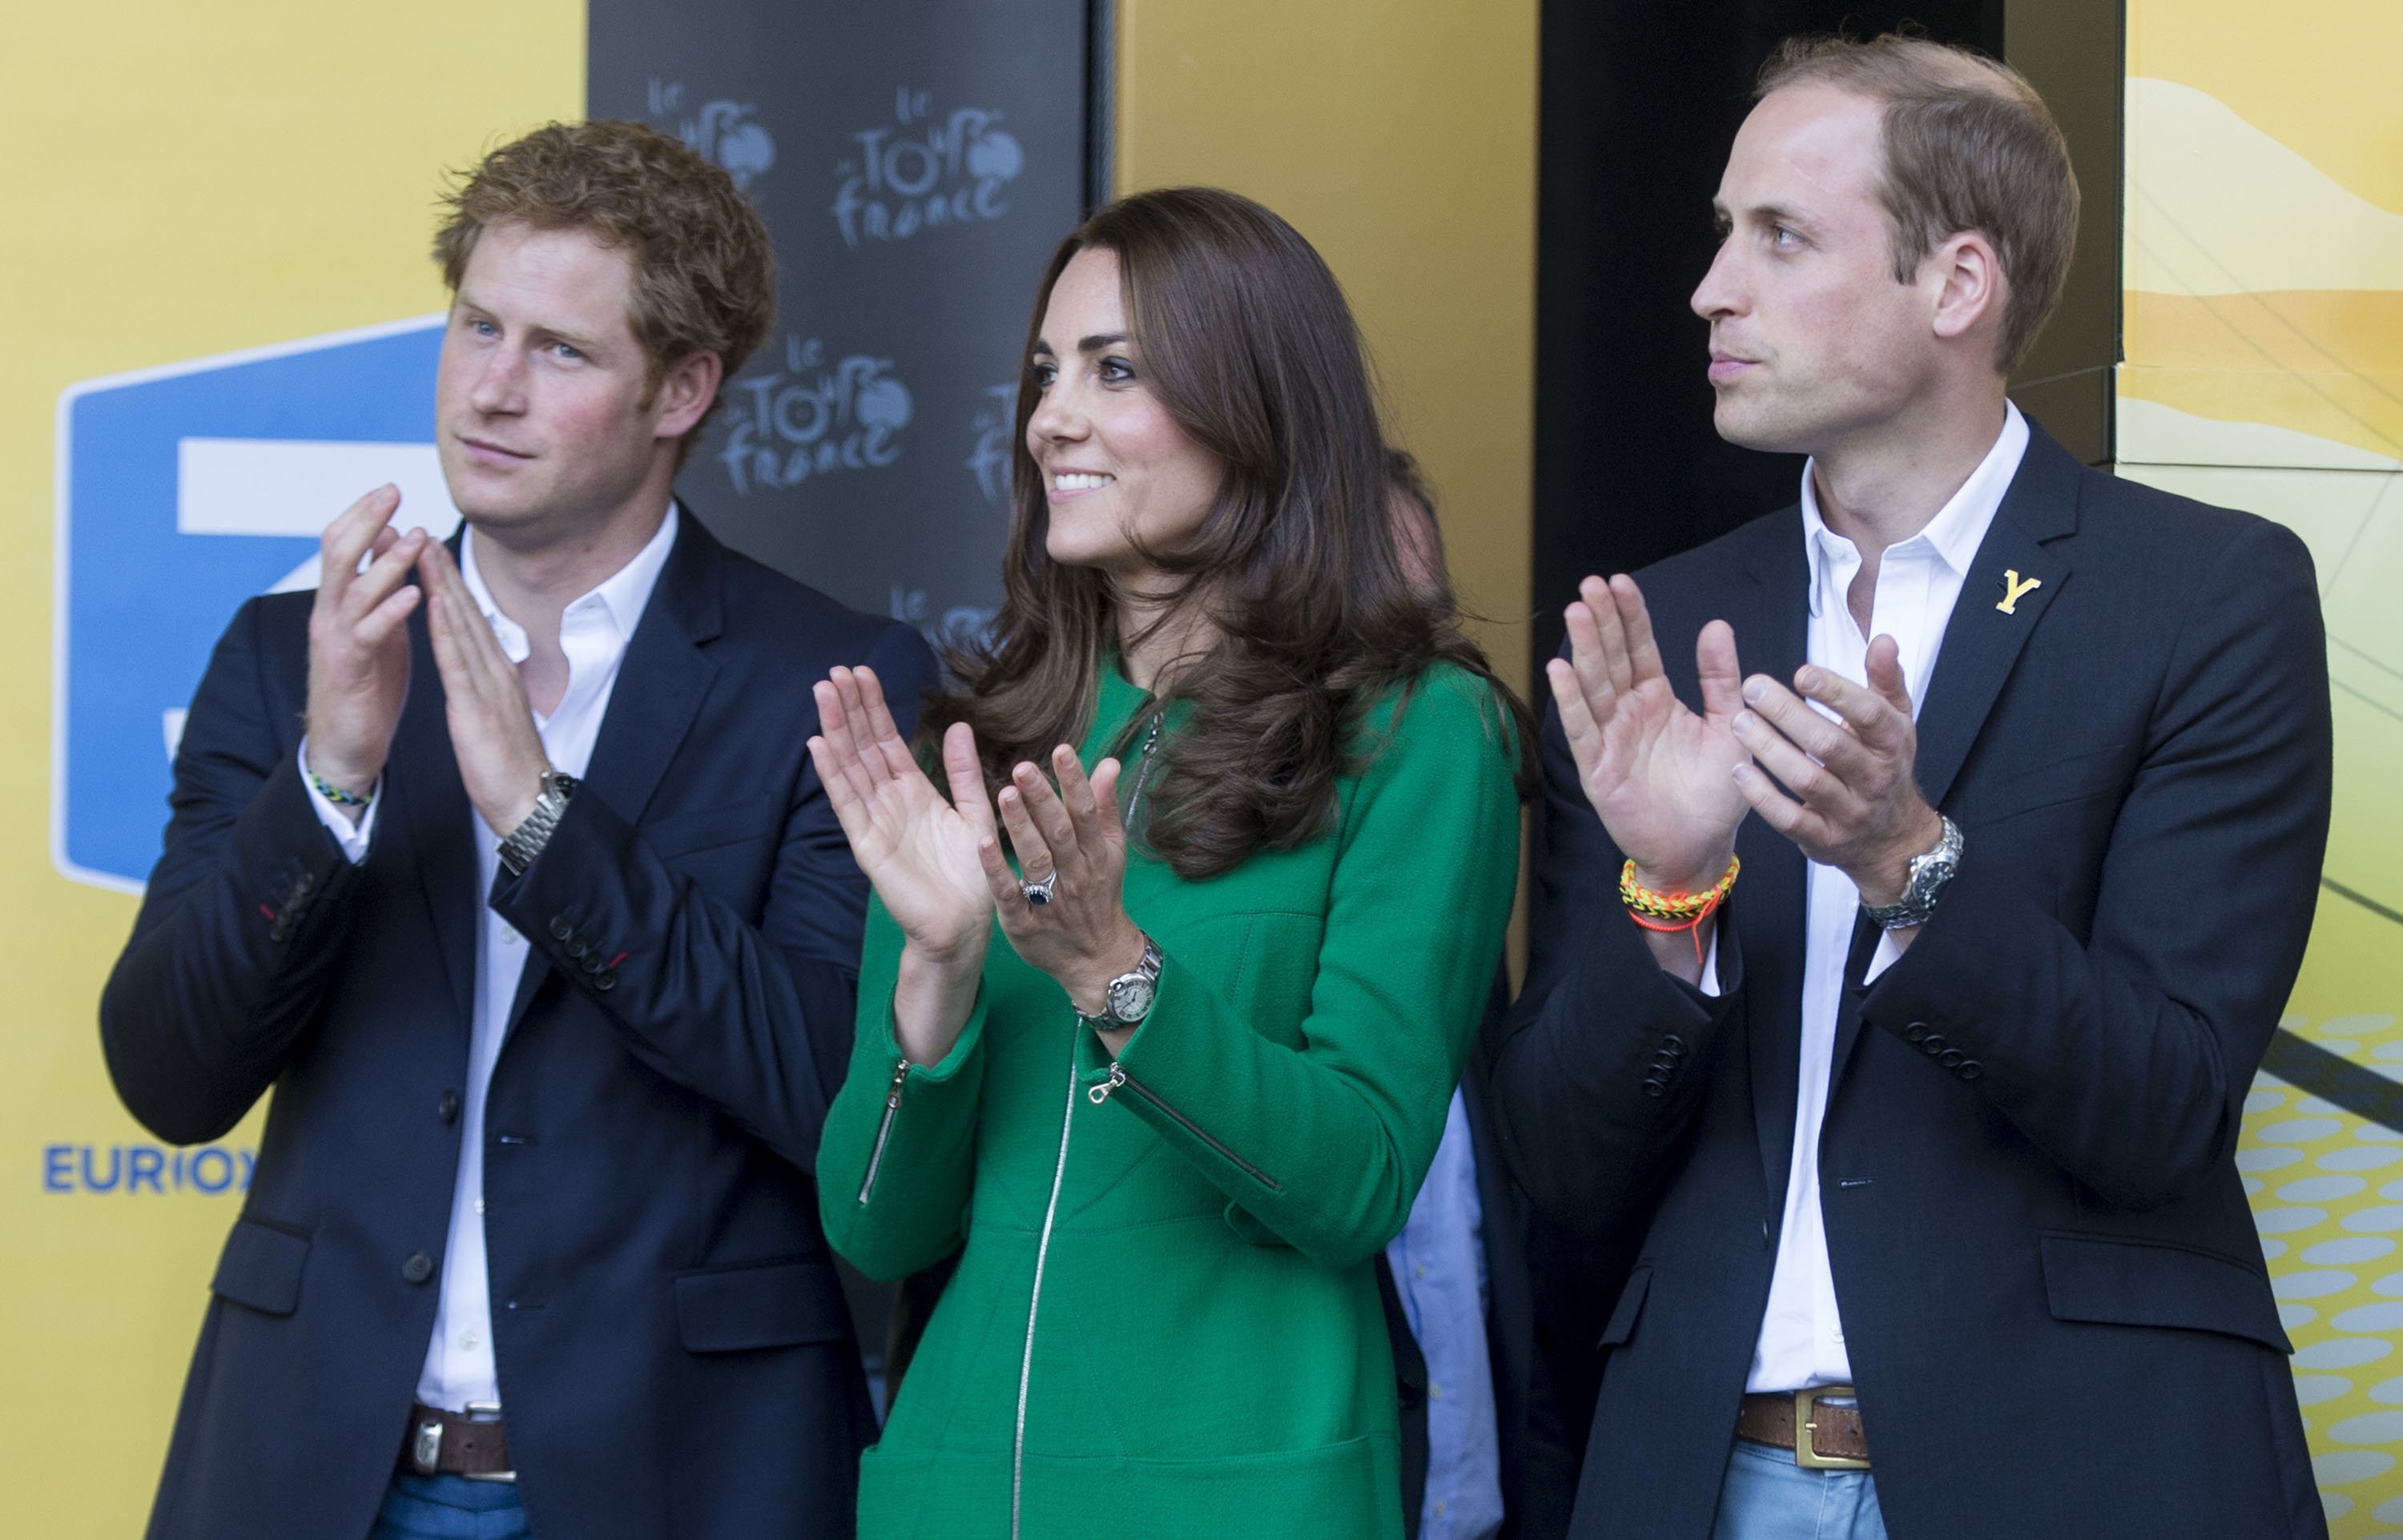     Prince William, Duke of Cambridge and Catherine, Duchess of Cambridge with Prince Harry at the finish line of the first stage of the Tour de France on July 5, 2014 in Harrogate, England.  |  Source: Getty Images